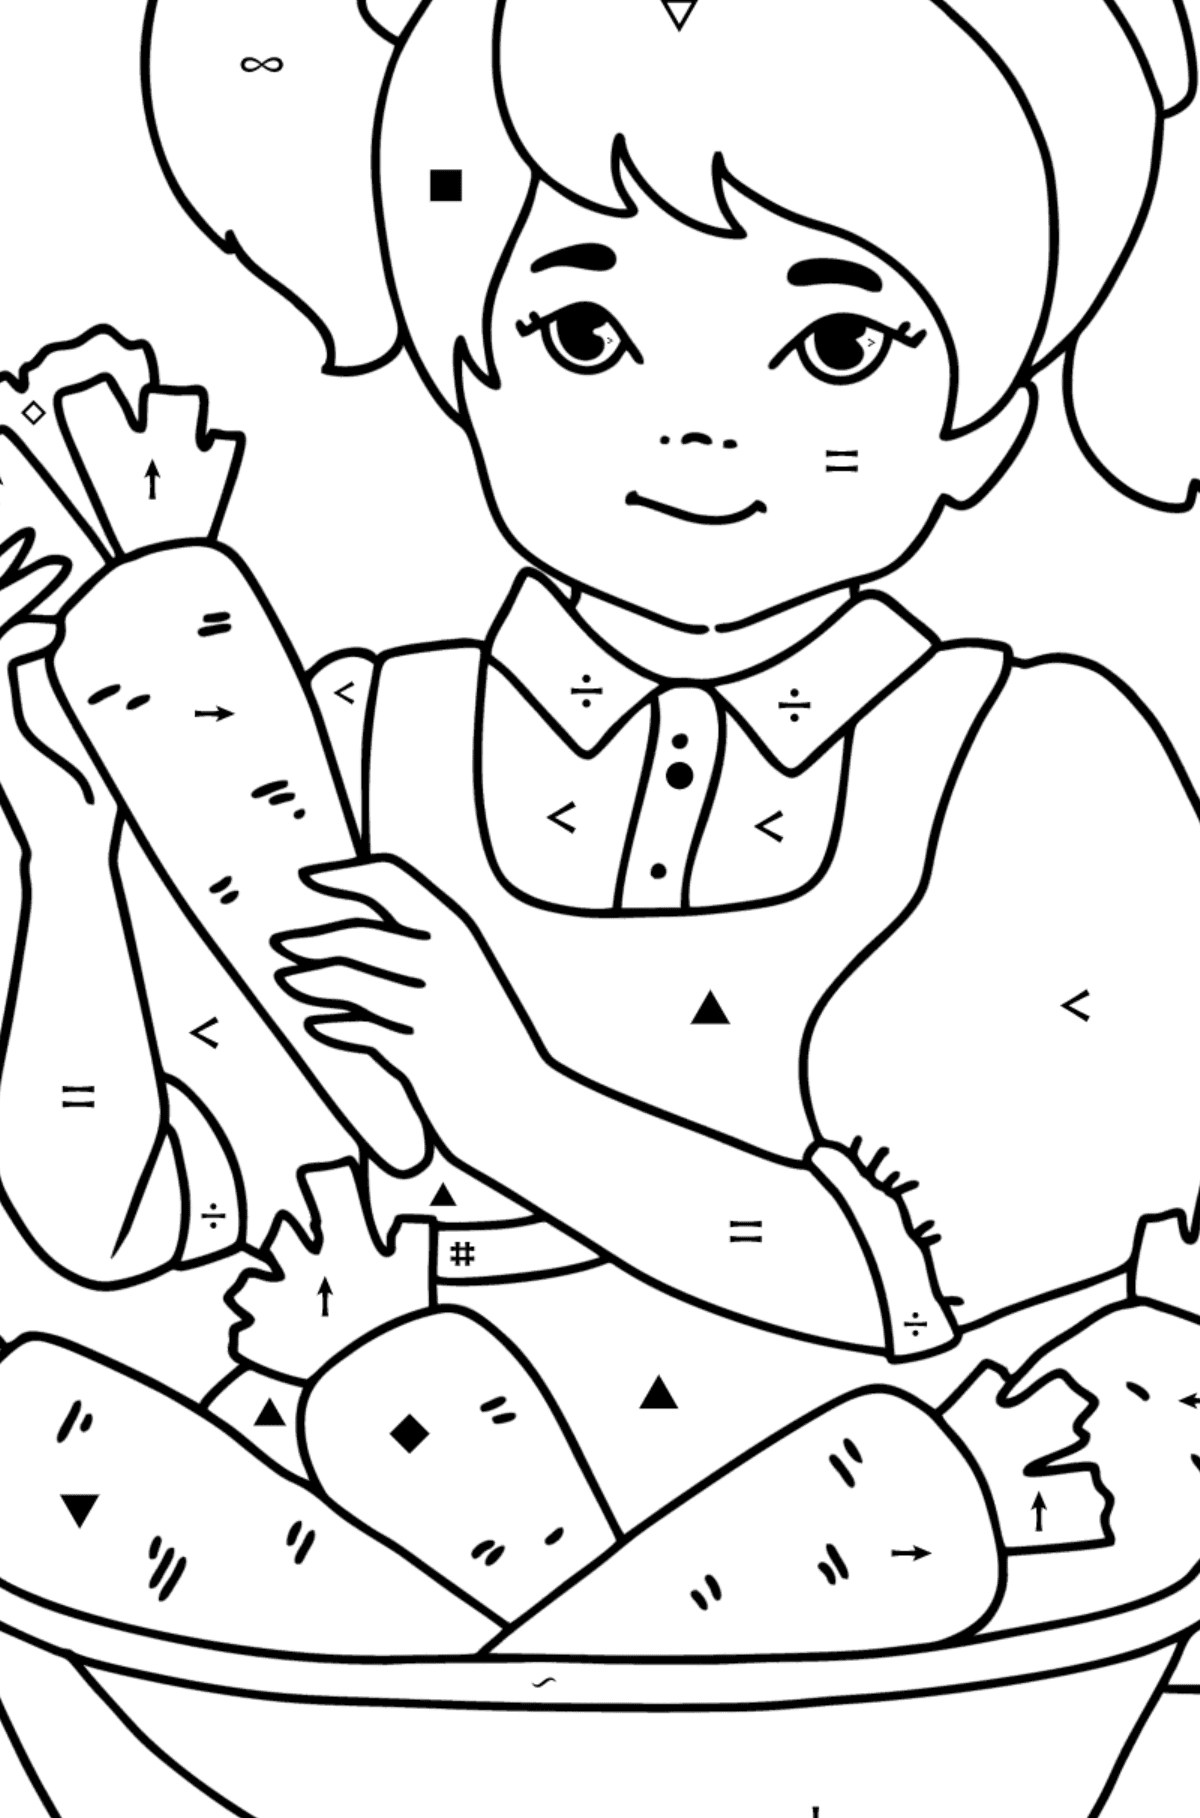 Girl in the kitchen сoloring page - Coloring by Symbols for Kids